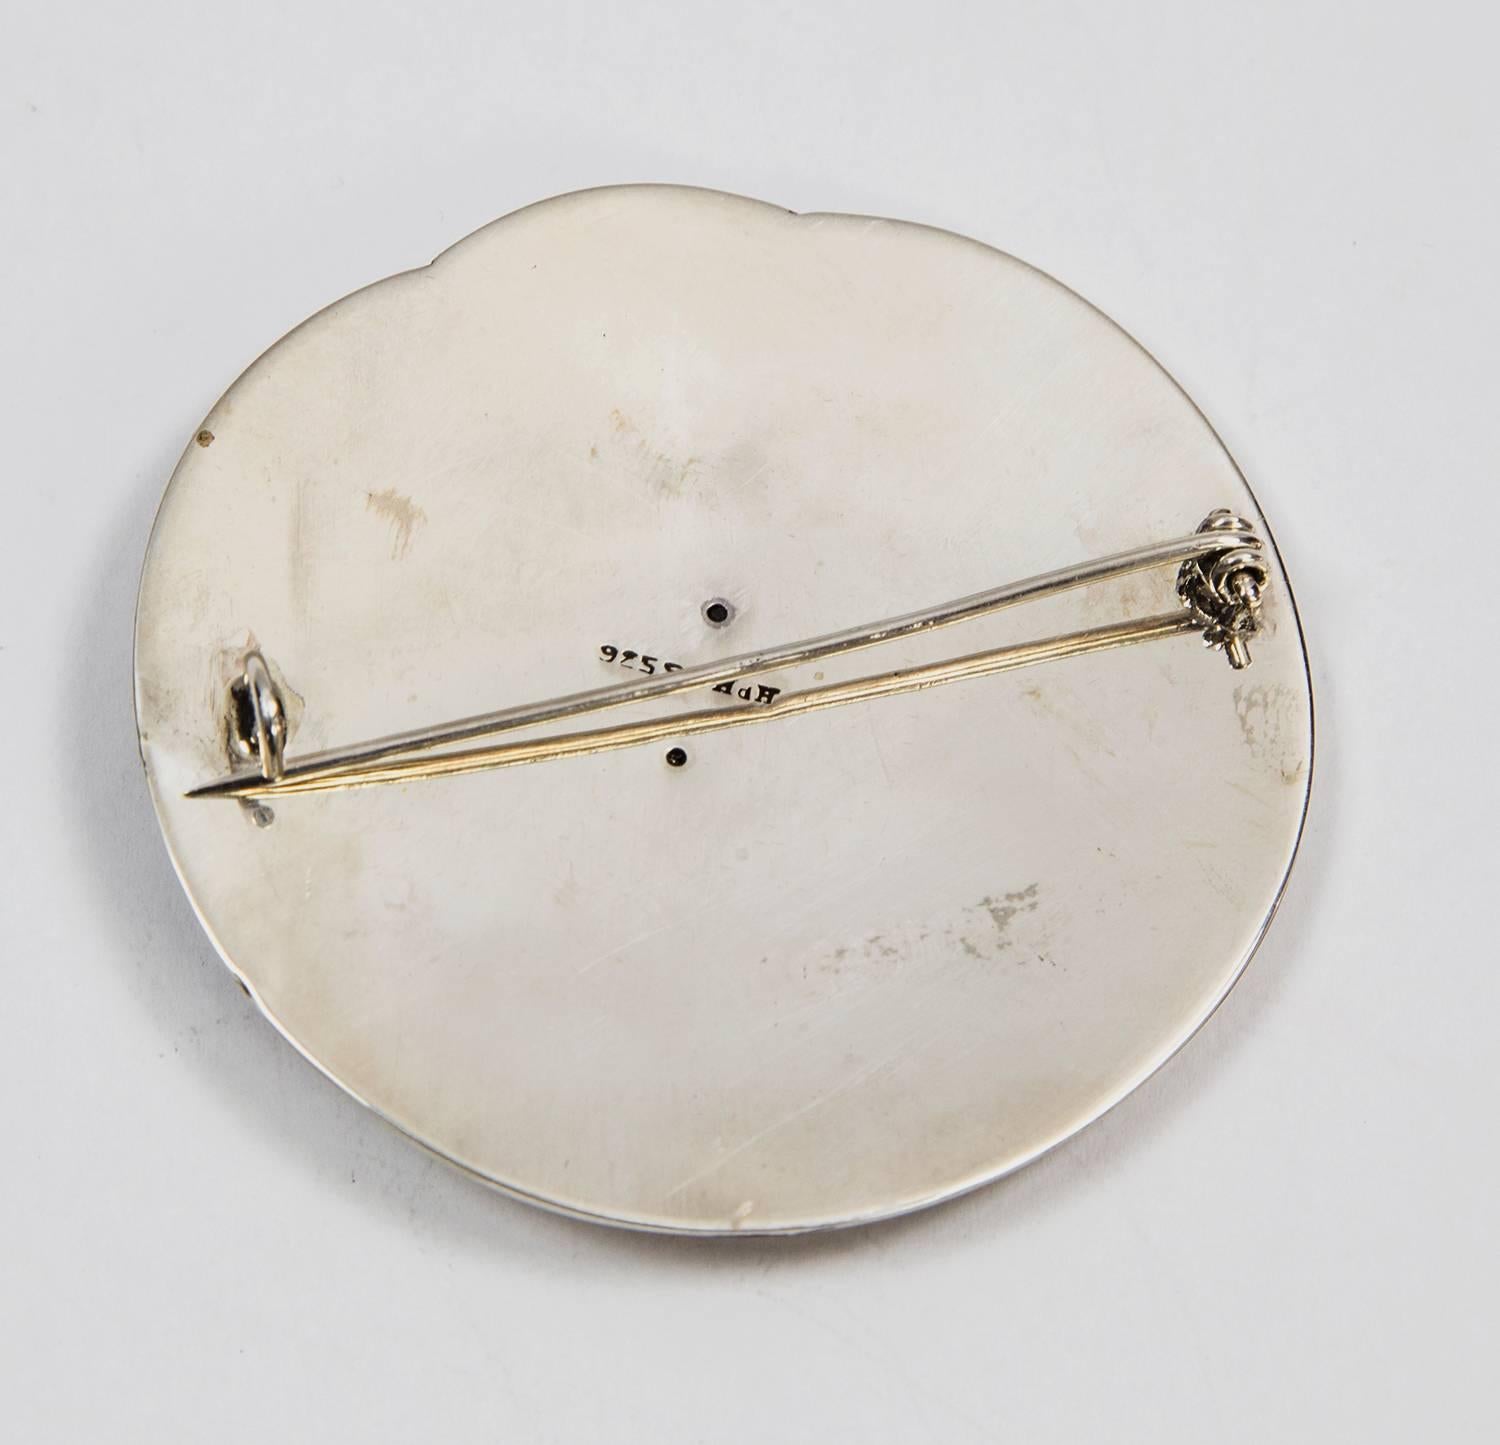 Avant Garde and Fabulous Hand Hammered Circular Brooch designed by Hans Hansen of Denmark (1884-1940) c1930s; measuring approx. 2.40” in diameter; marked: HdH 925S. In original box; Highly Collectible, Chic and Timeless…the perfect gift for that